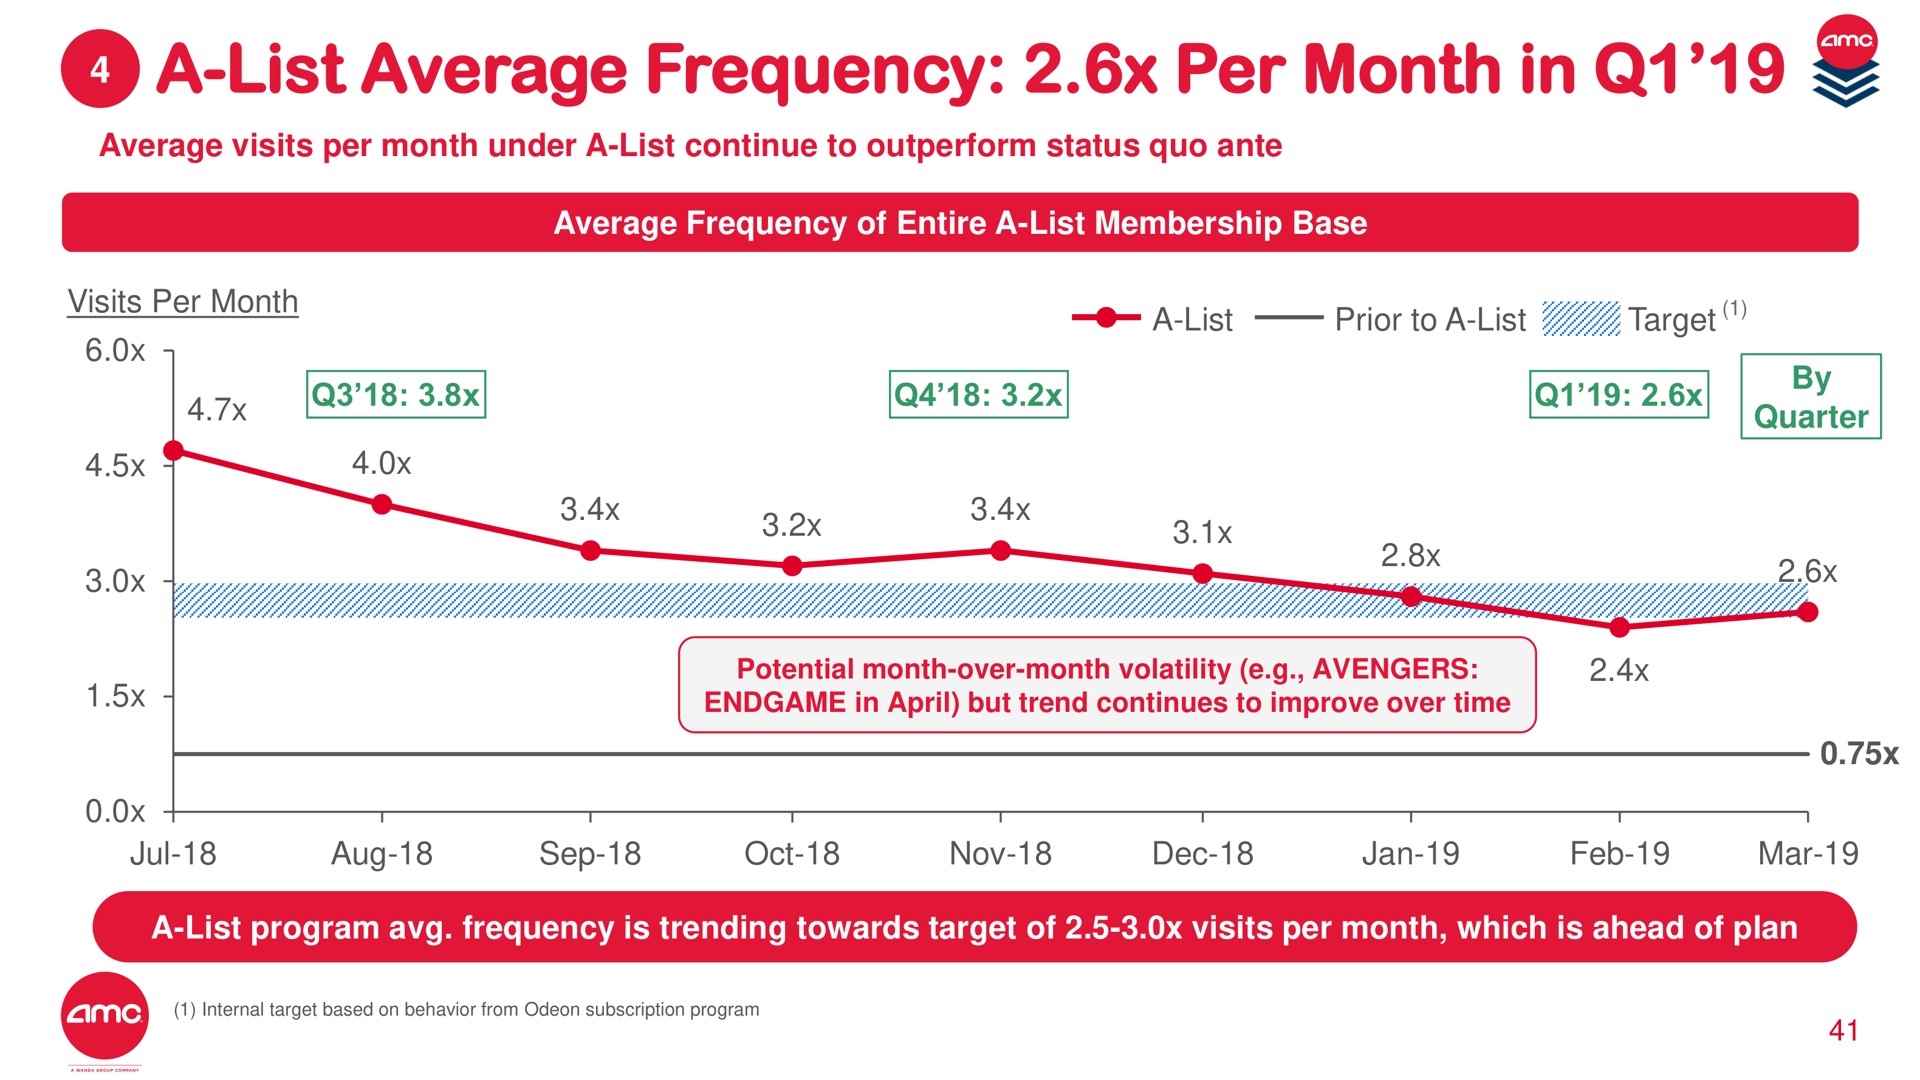 a list average frequency per month in | AMC